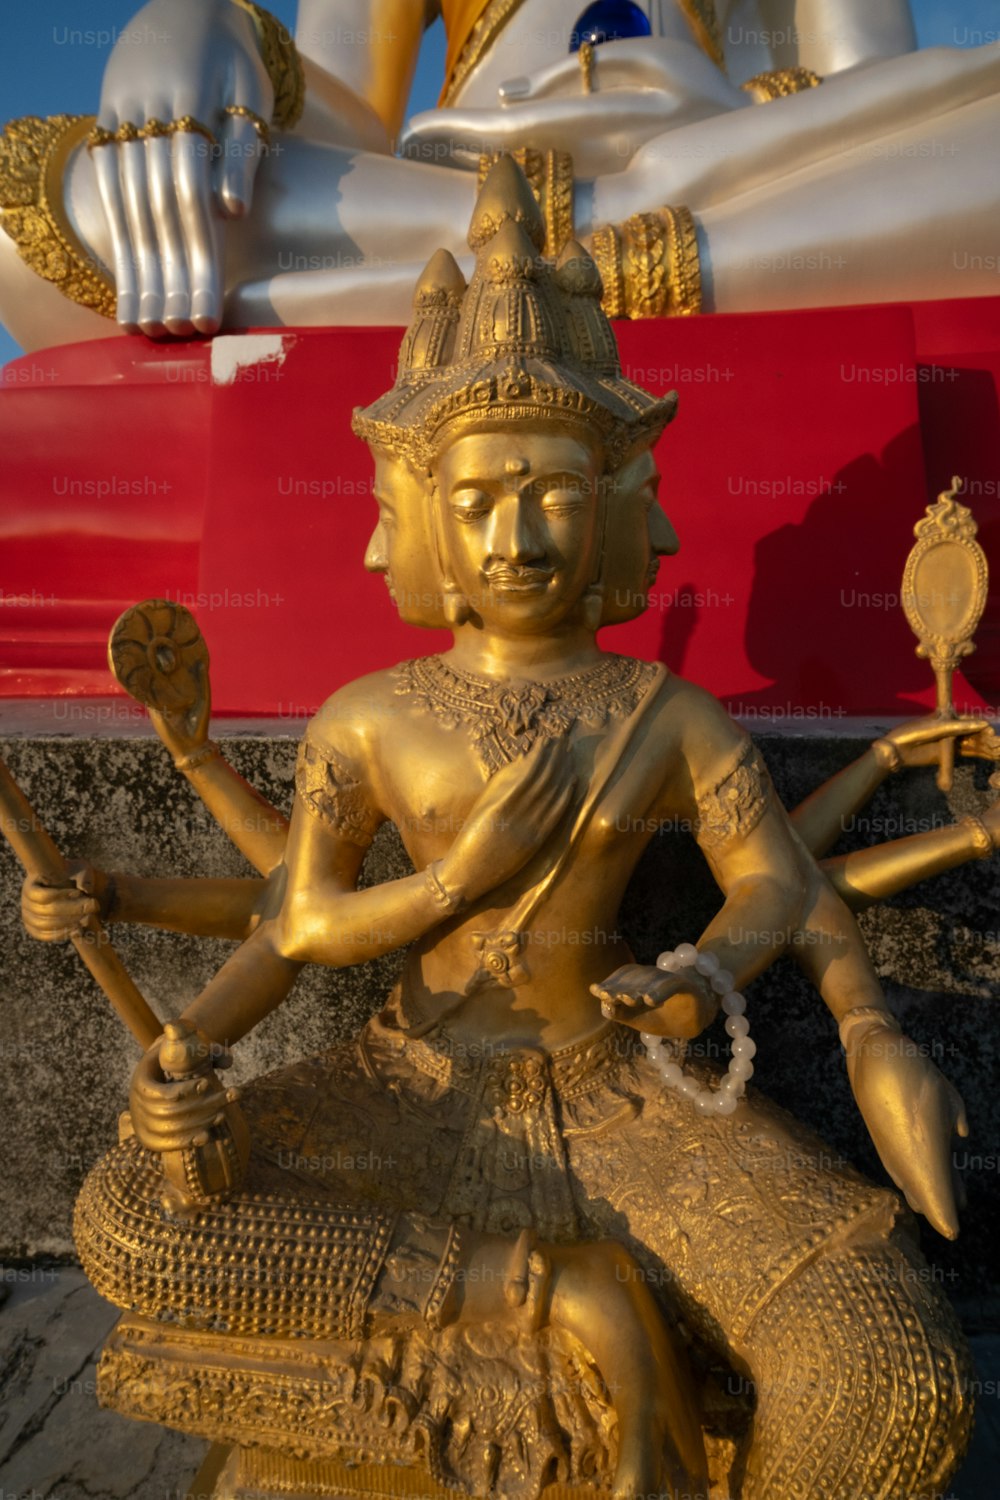 a golden statue sitting on top of a wooden table